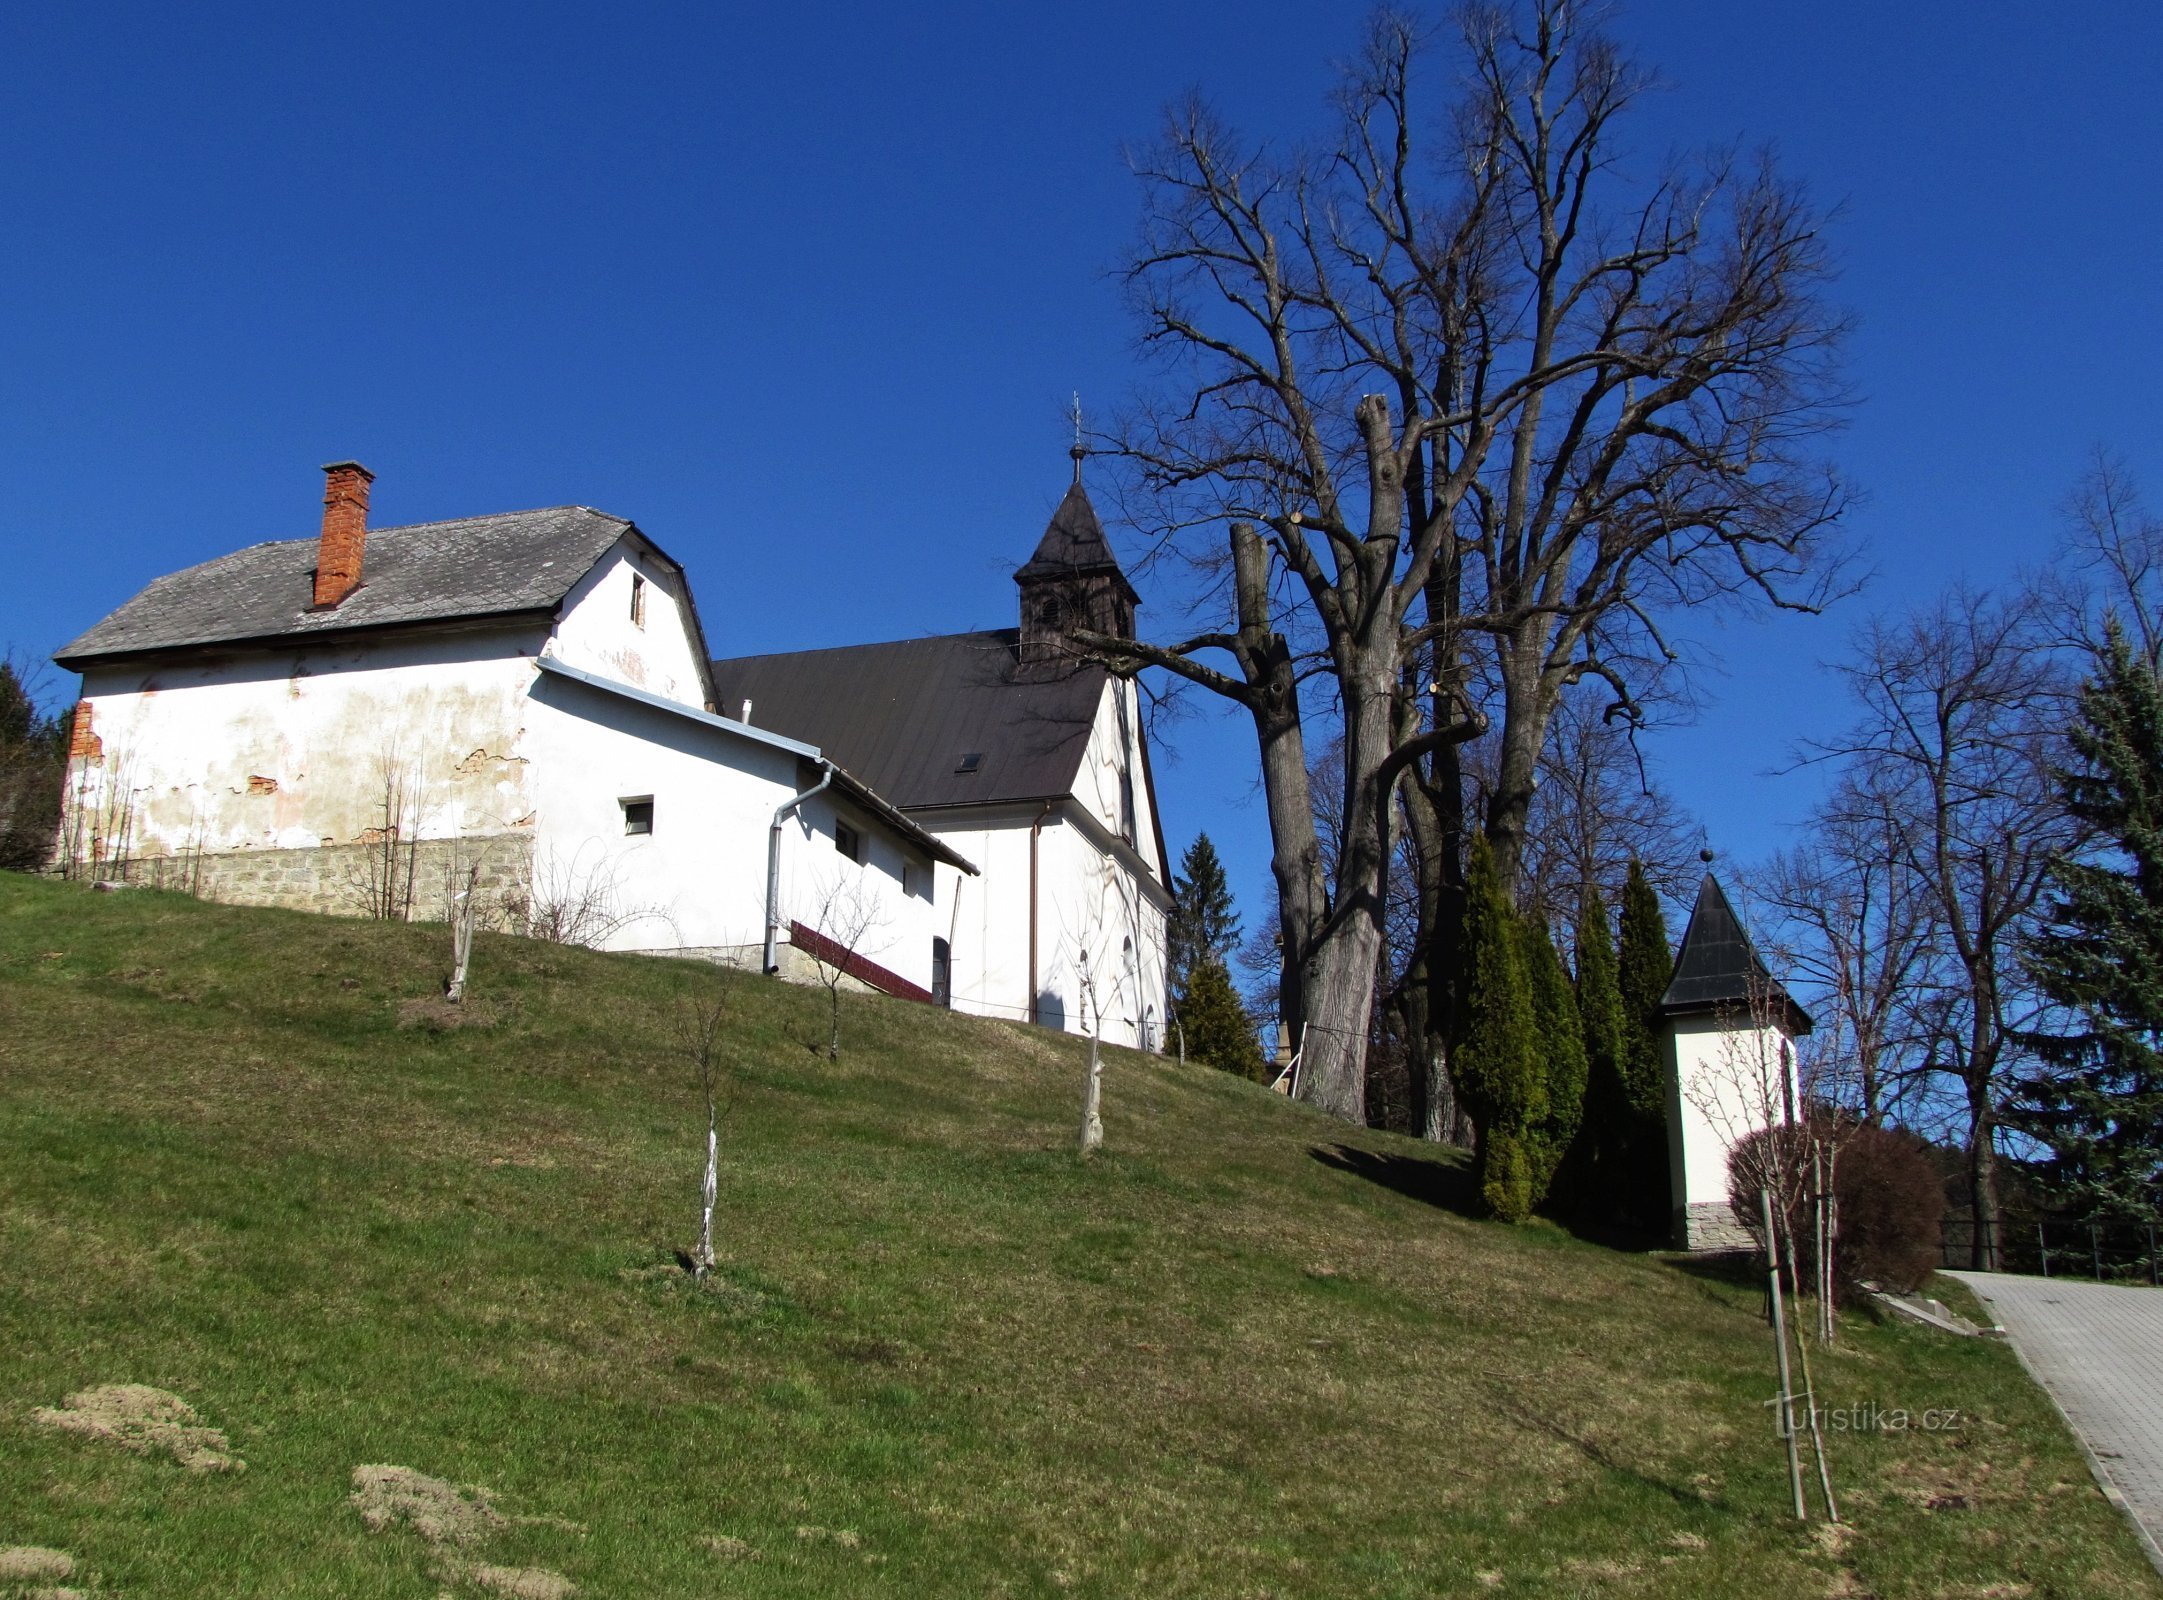 Zděchov - a hill with the Church of the Transfiguration of the Lord